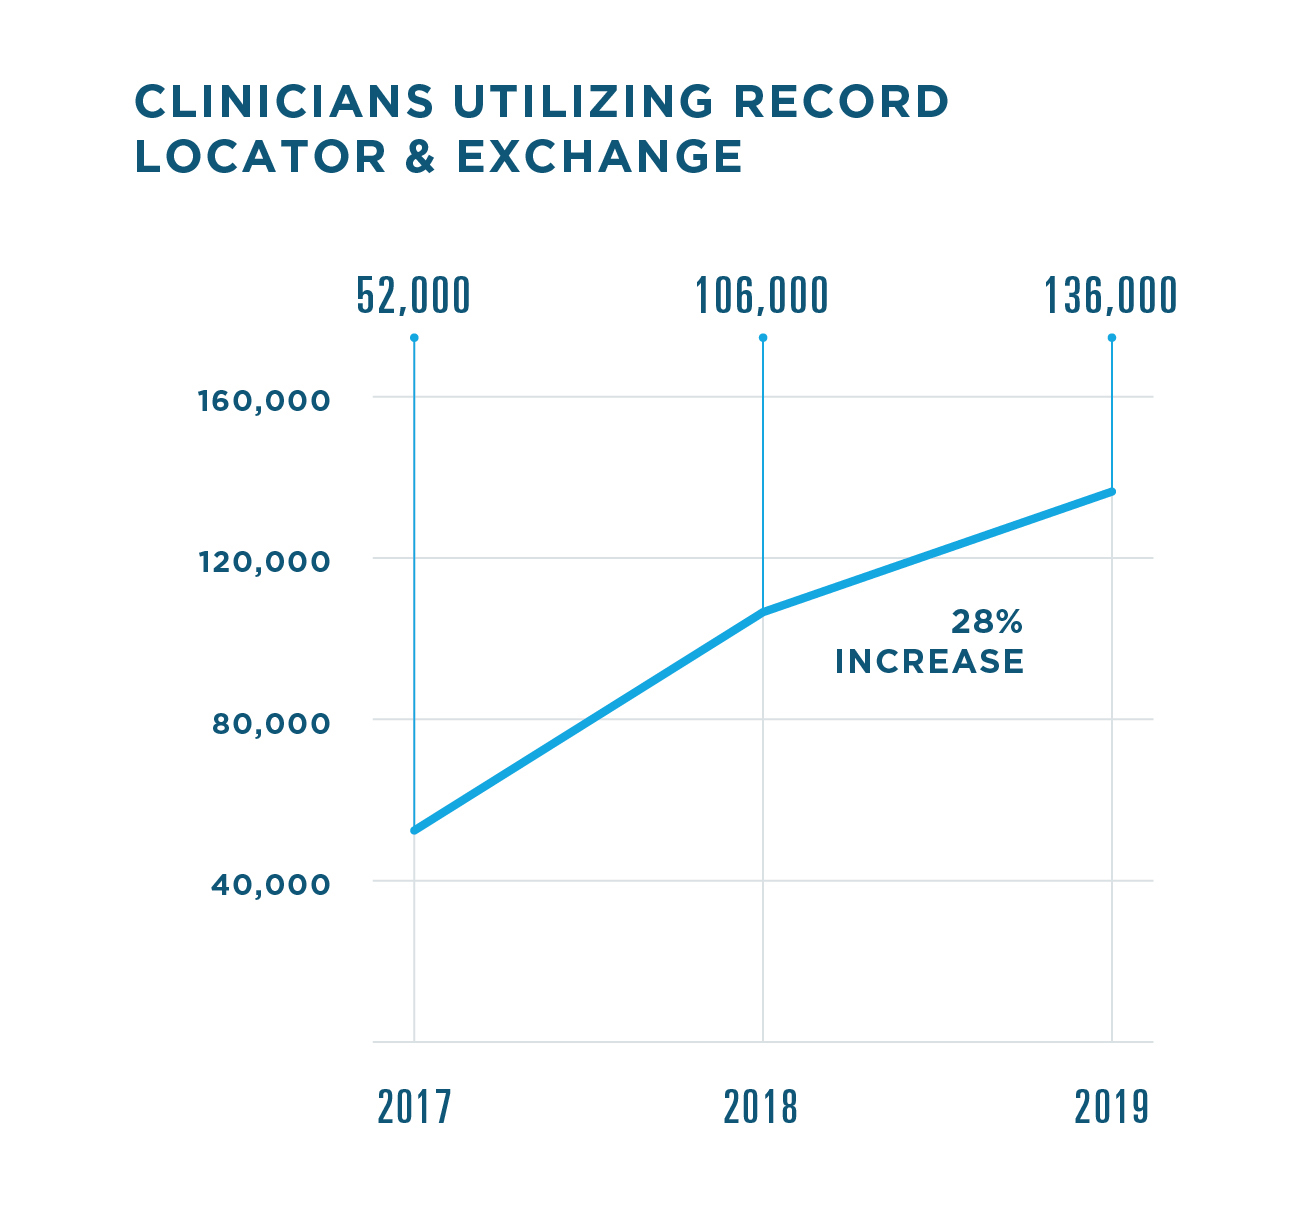 136,000 clinicians utilized Record Locator & Exchange in 2019, a 28% increase from 106,000 in 2018. 52,000 used the service in 2017.